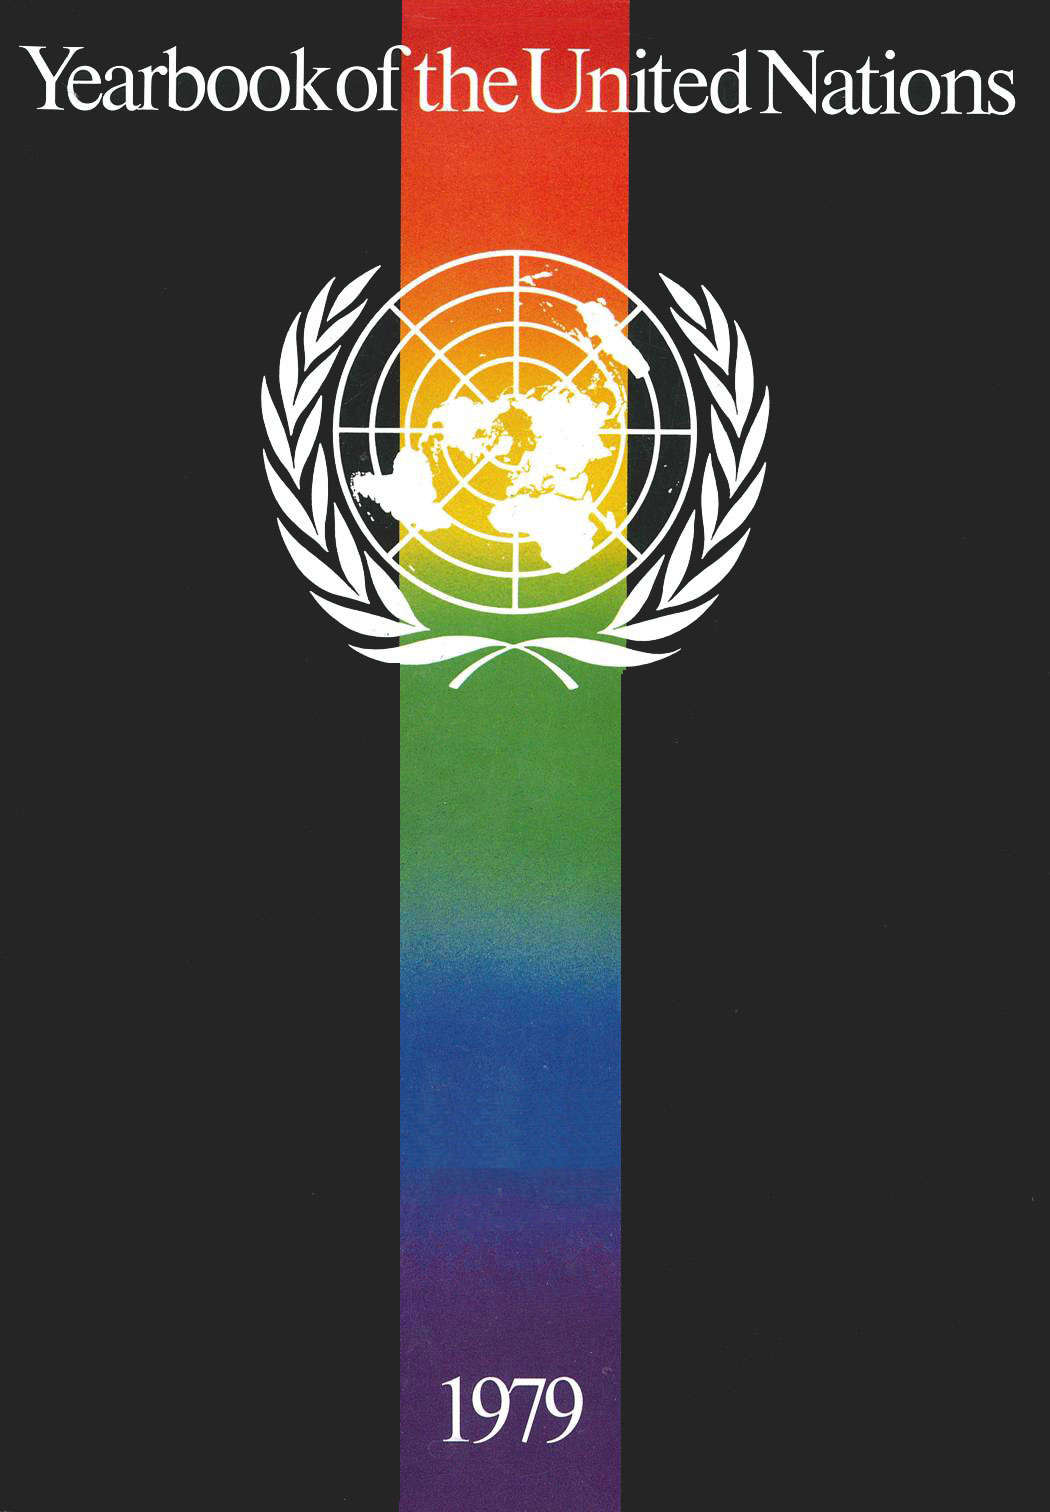 image of Yearbook of the United Nations 1979